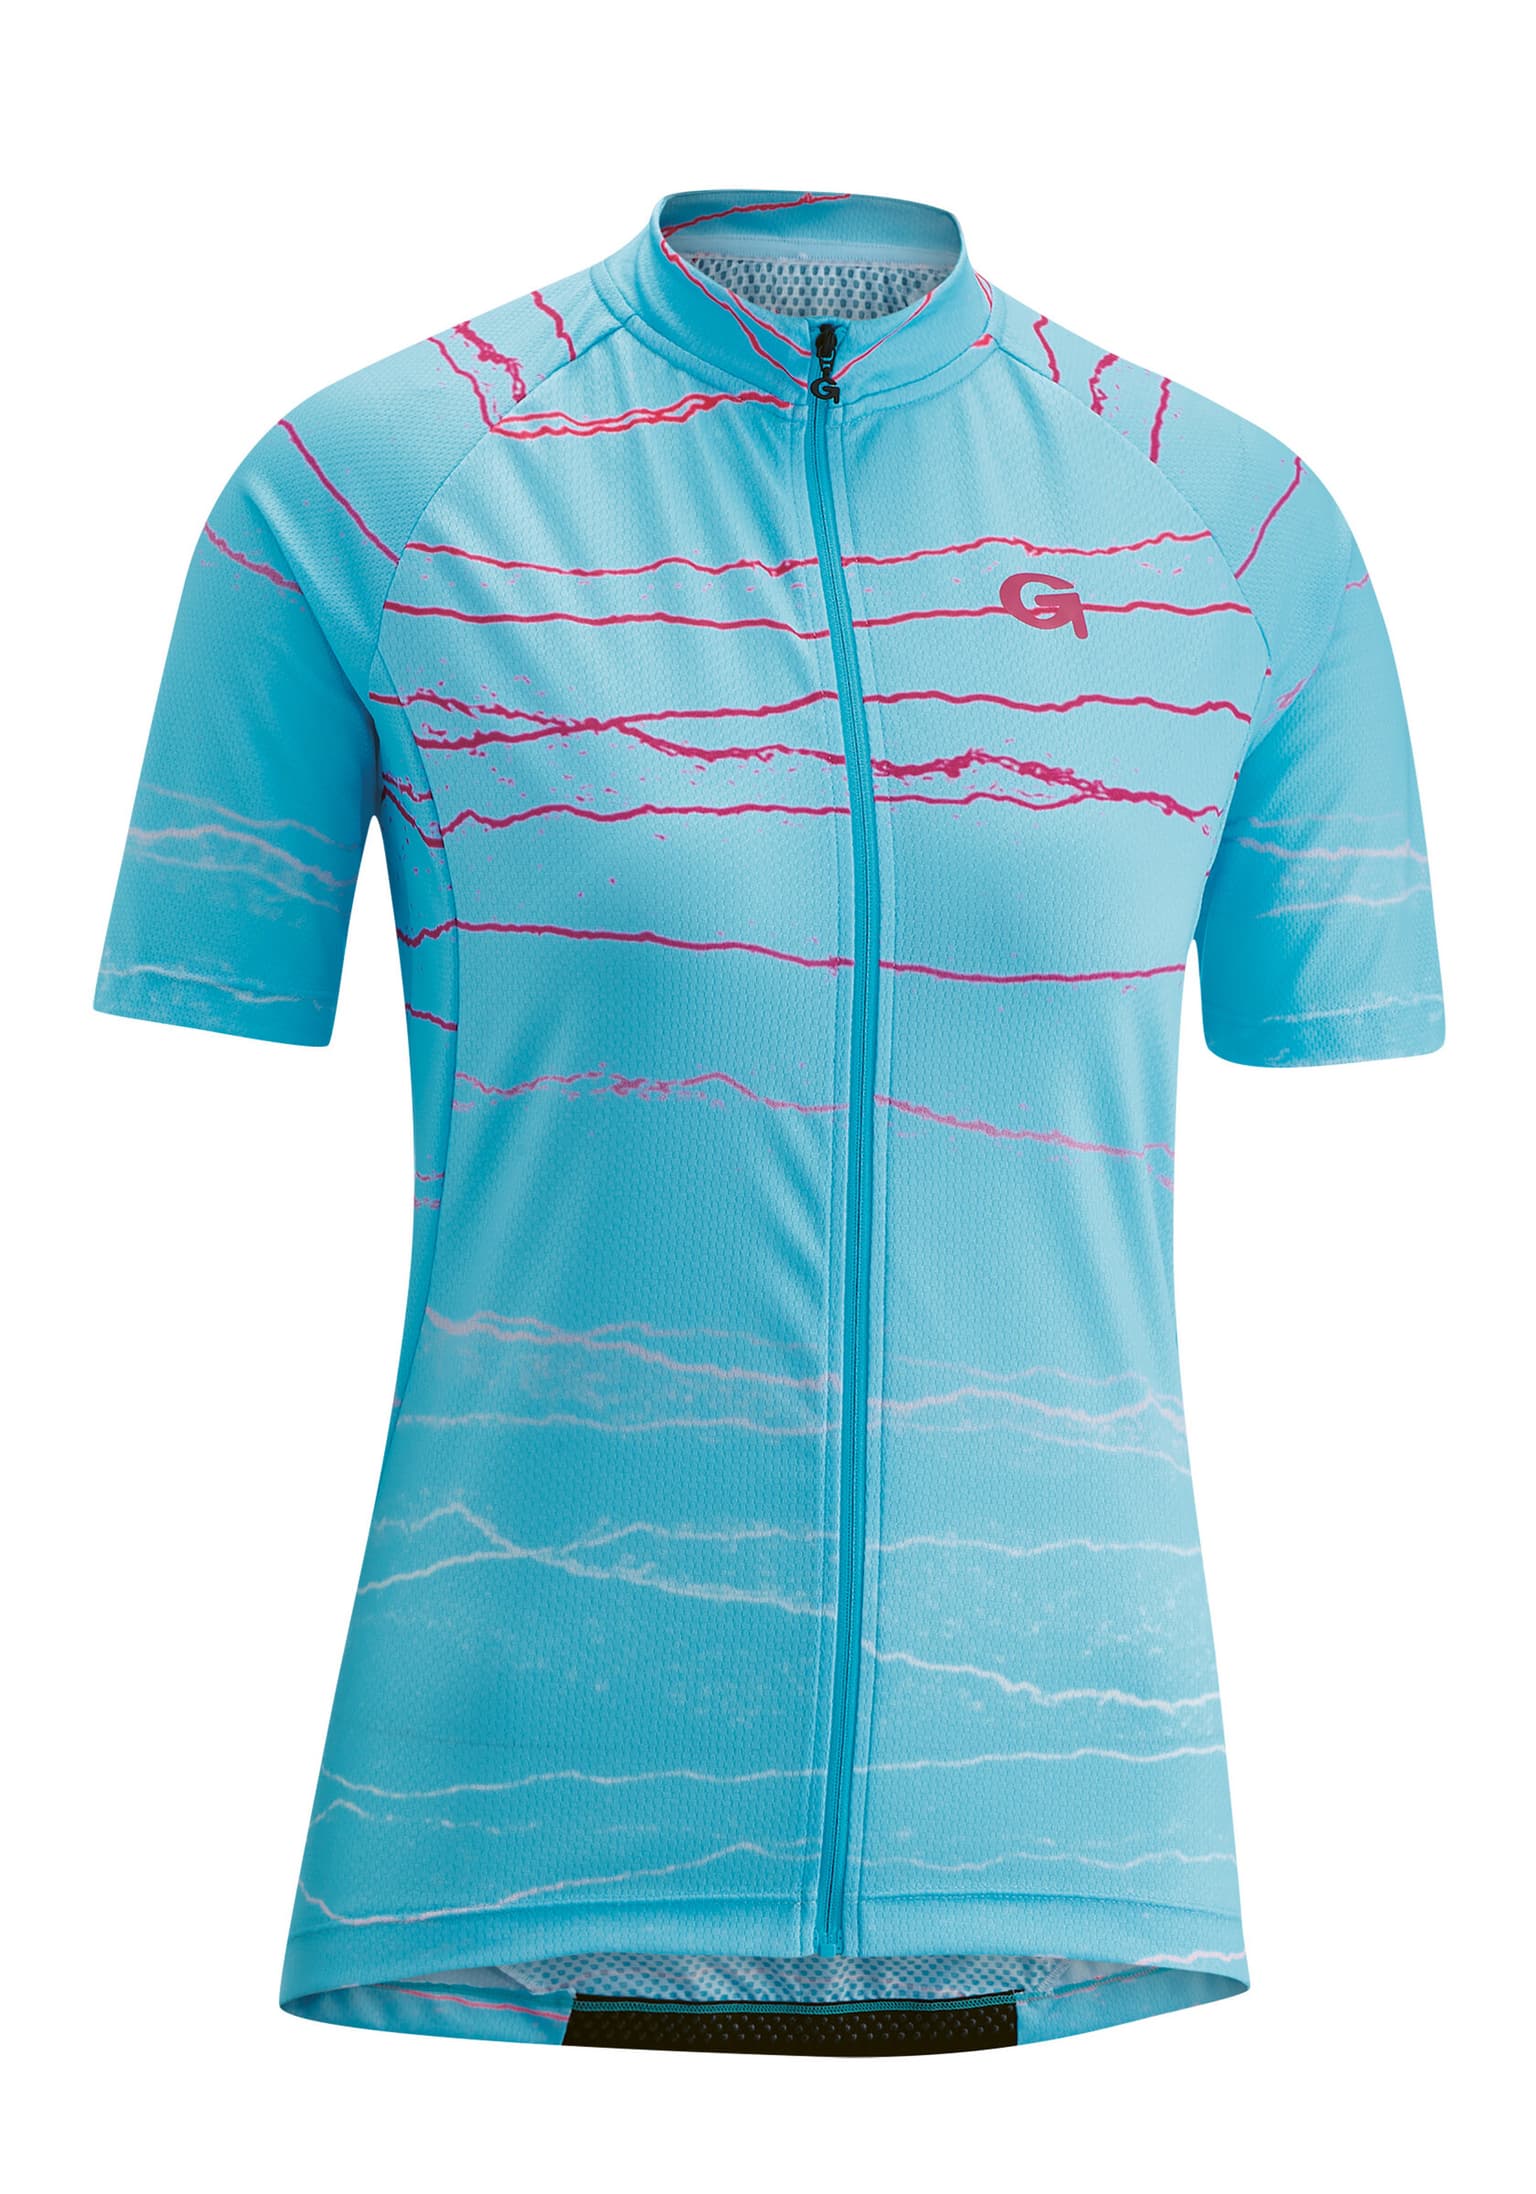 Gonso Gonso Veliki Chemise de vélo turquoise-claire 1